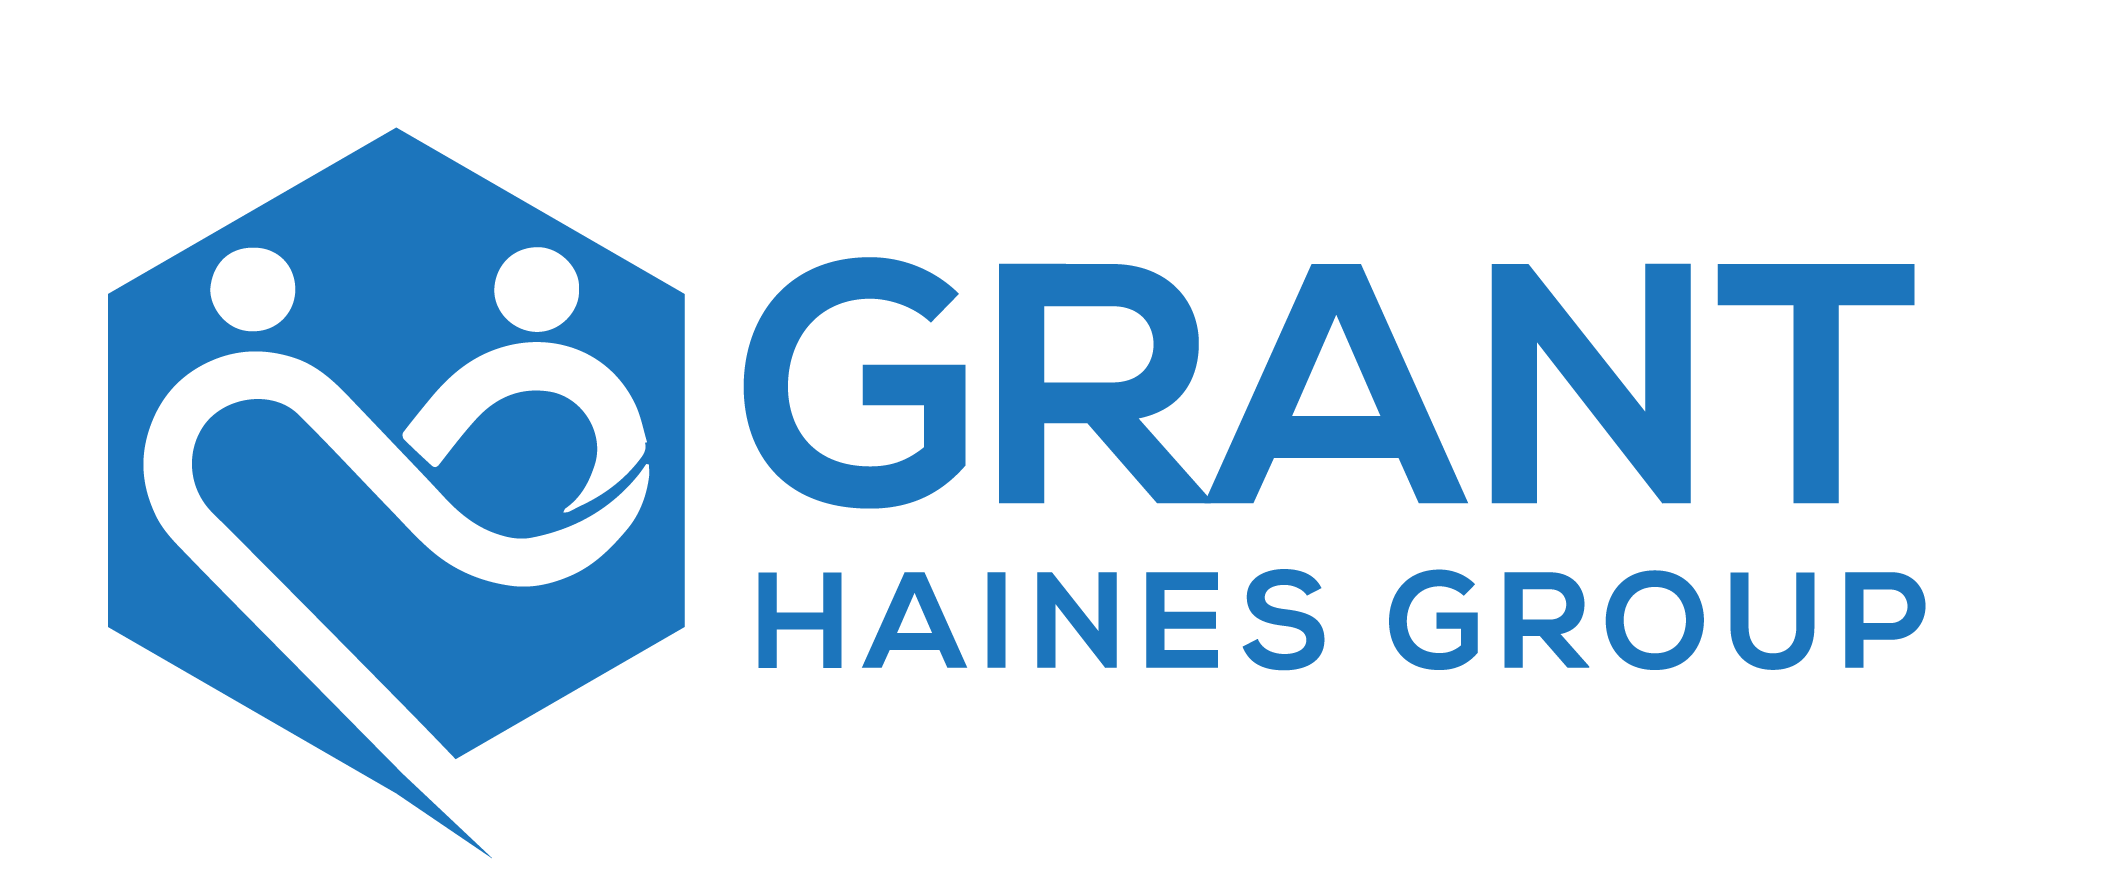 Grant Haines Group